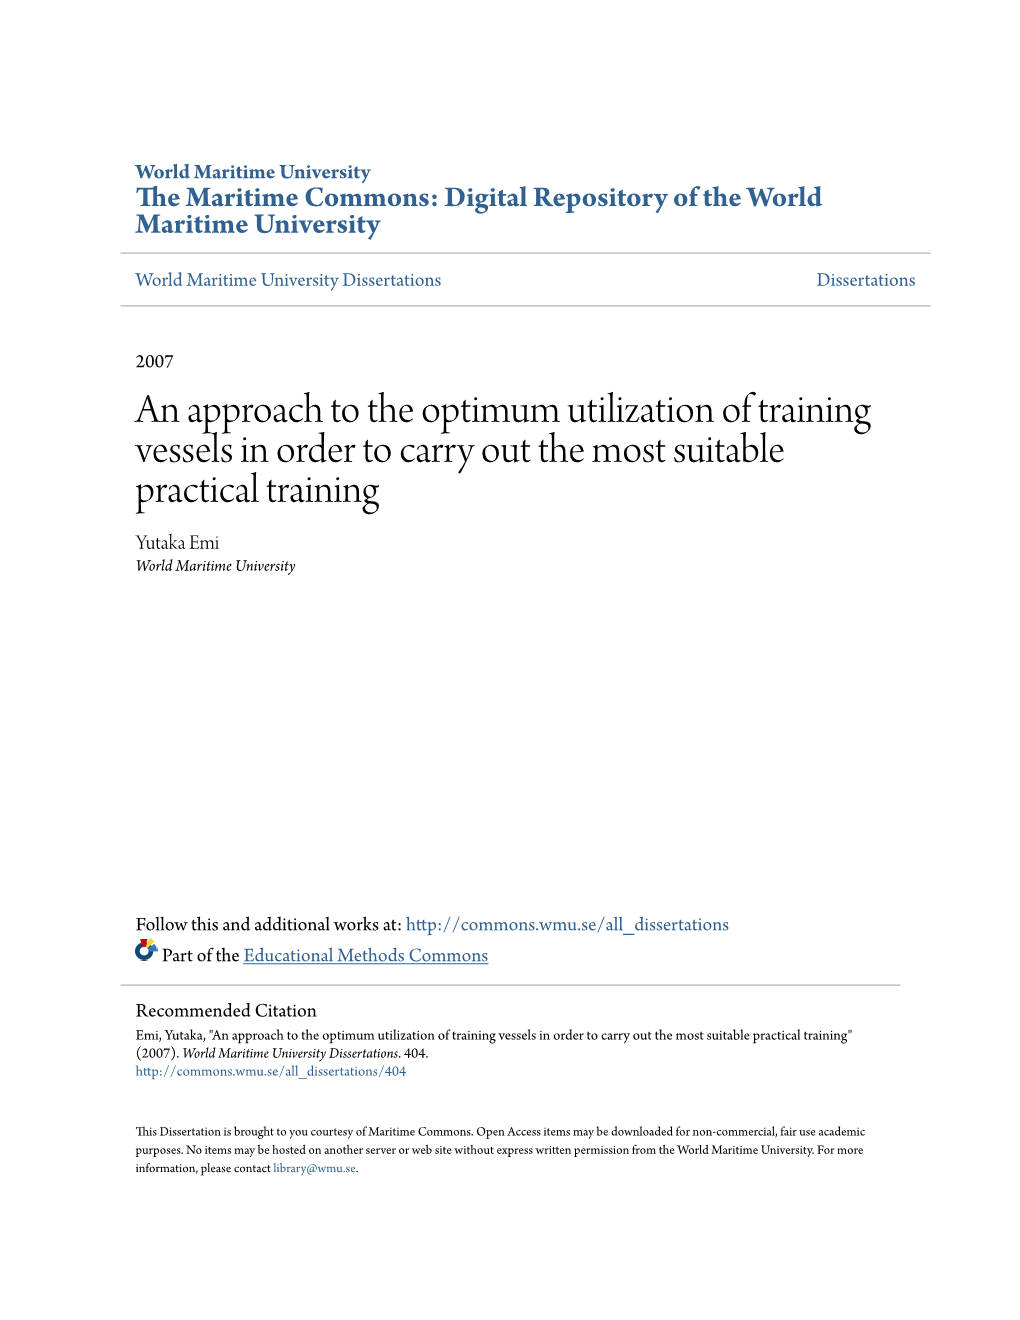 An Approach to the Optimum Utilization of Training Vessels in Order to Carry out the Most Suitable Practical Training Yutaka Emi World Maritime University